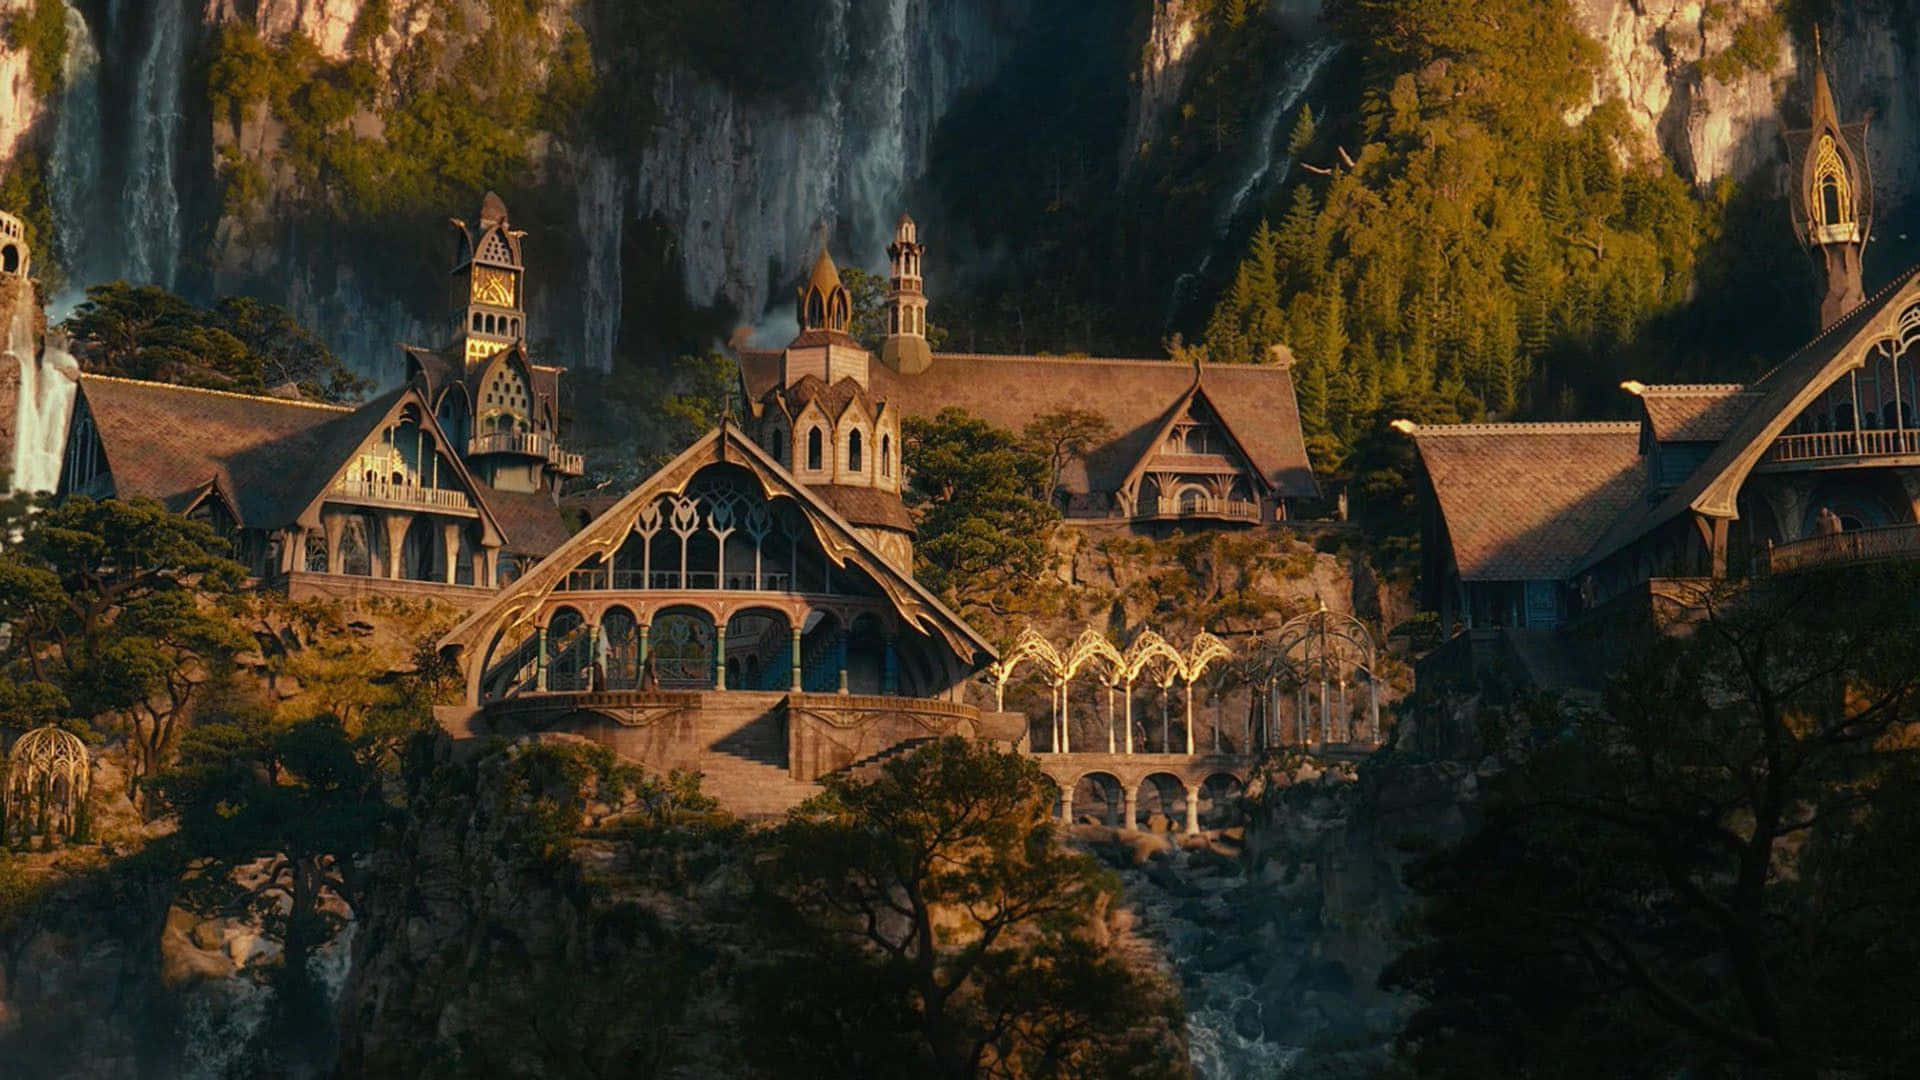 The Hobbit Castle Is Surrounded By Mountains